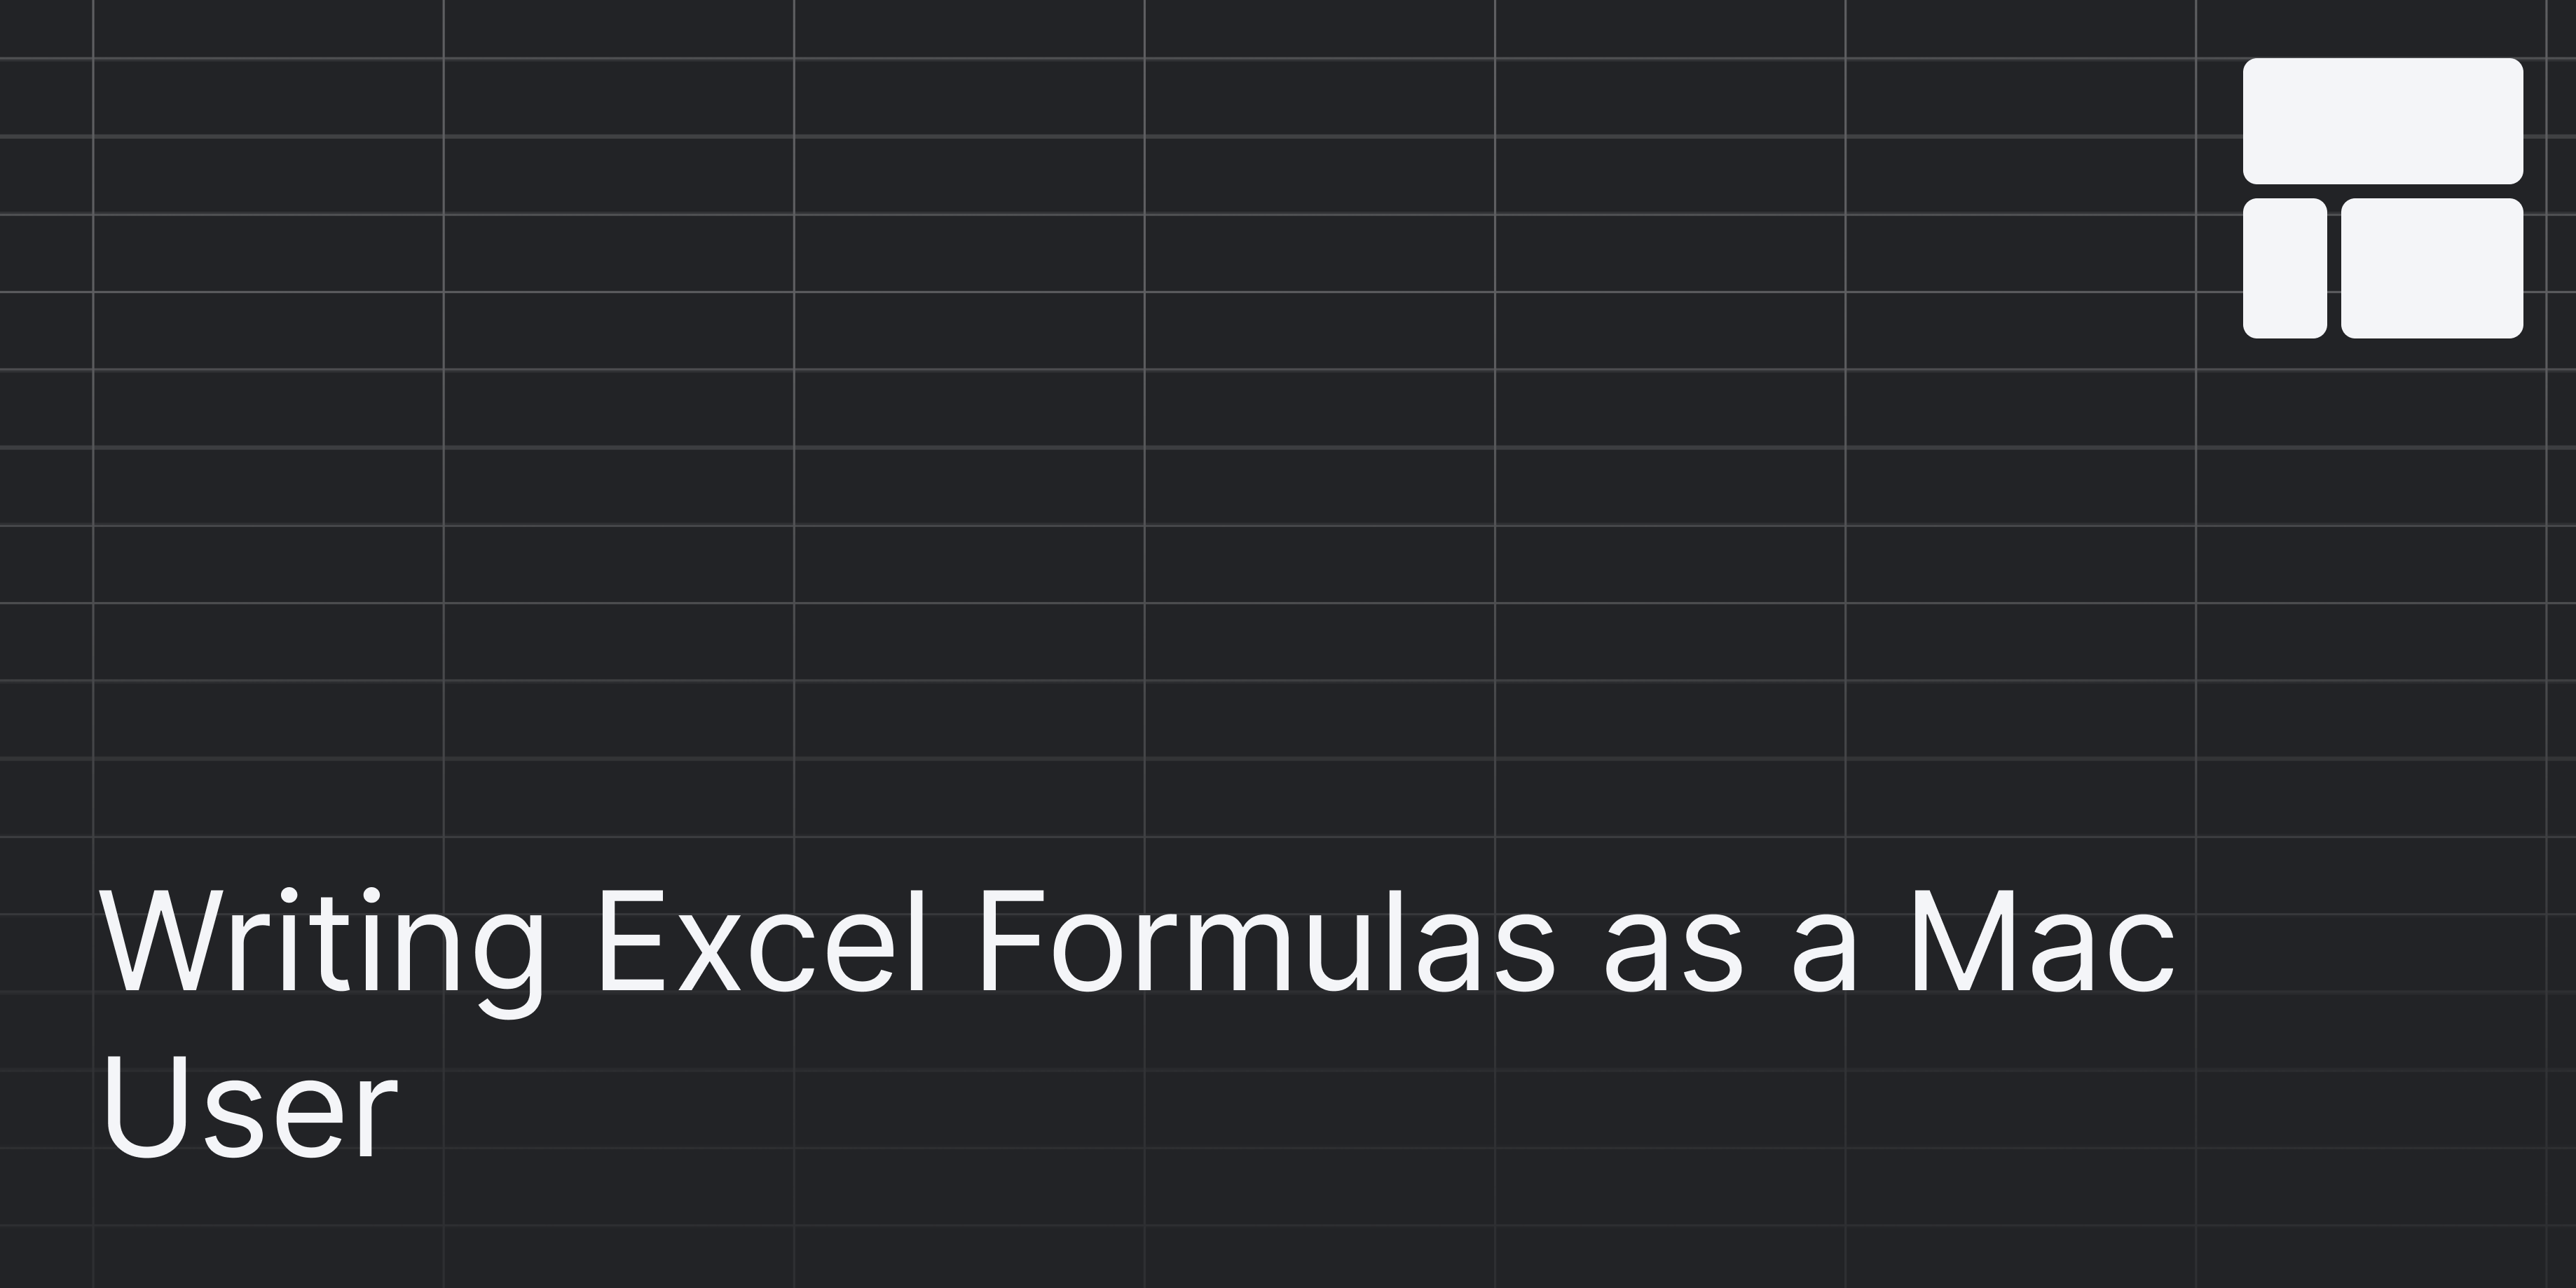 Cover Image for Writing Excel Formulas as a Mac User